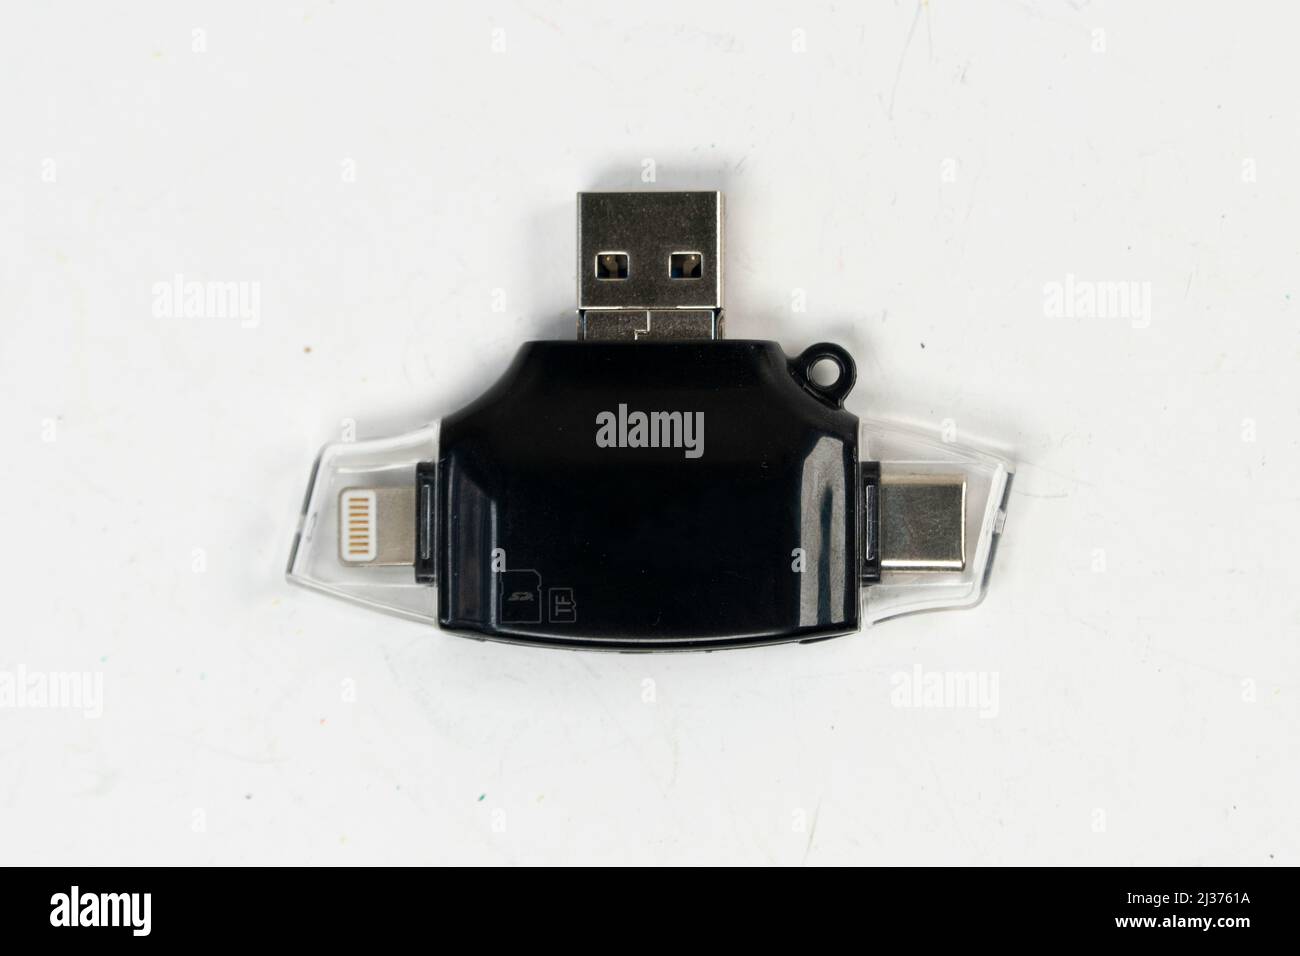 Micro usb device isolated on white background, smartphone connection tool, black usb device top view selective focus Stock Photo